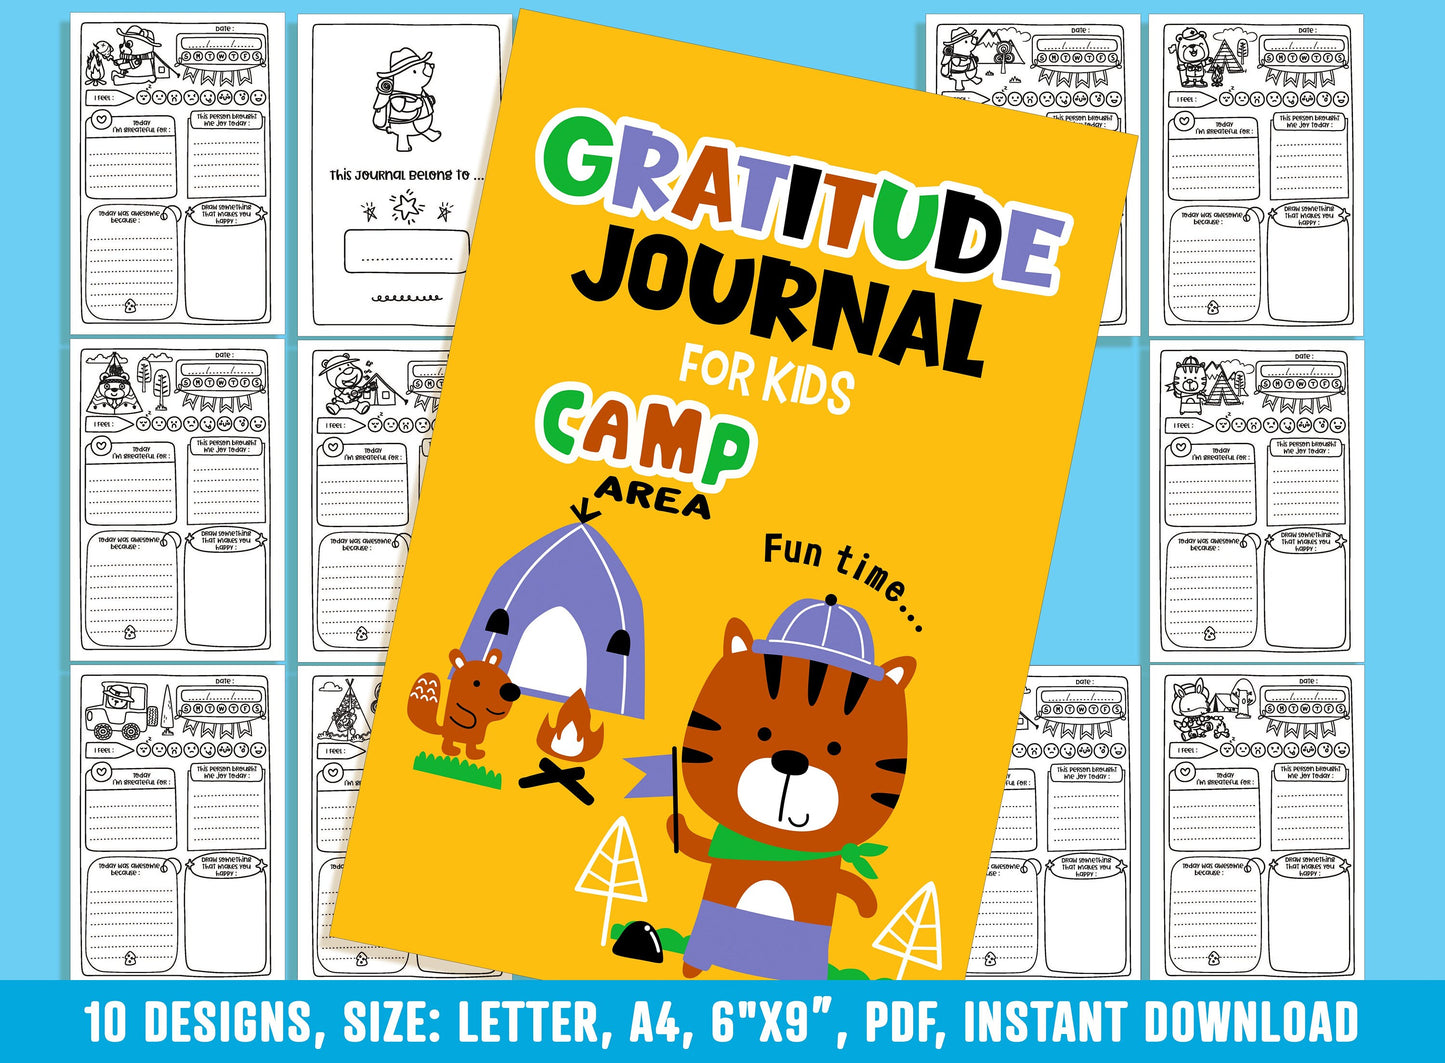 Gratitude Journal for Kids - Camp Area, Daily Journal Prompts, 10 Designs, Size: Letter 8.5"x11", A4, 6"x9", Printable PDF, Boys/Girls